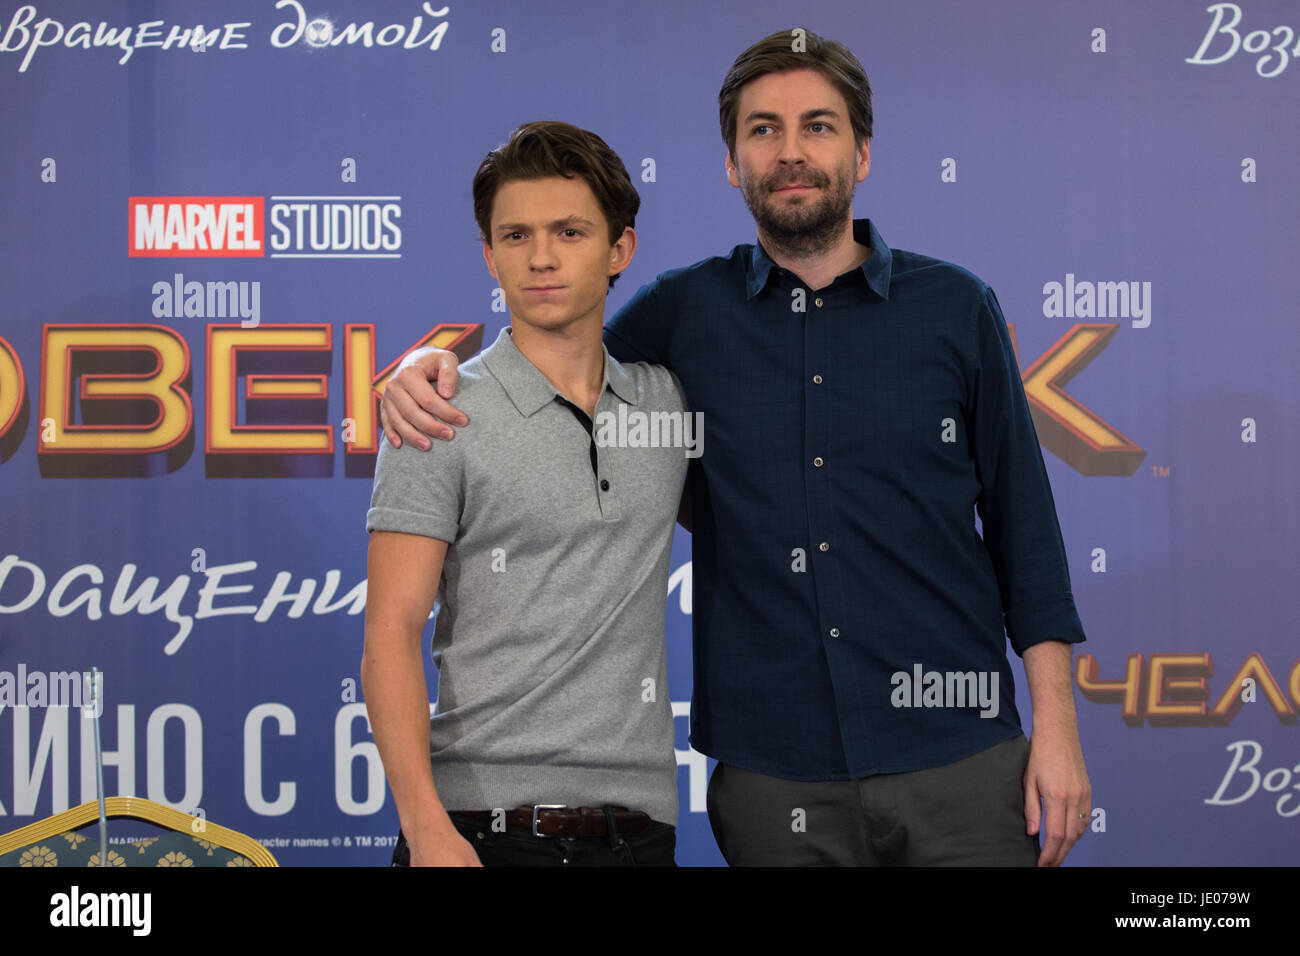 Moscow, Russia. 21th June, 2017. Actor Tom Holland(left) and director Jon Watts(right) at a news conference with the crew and cast of Jon Watts' film 'Spider-Man: Homecoming.'. Credit: Victor Vytolskiy/Alamy Live News Stock Photo